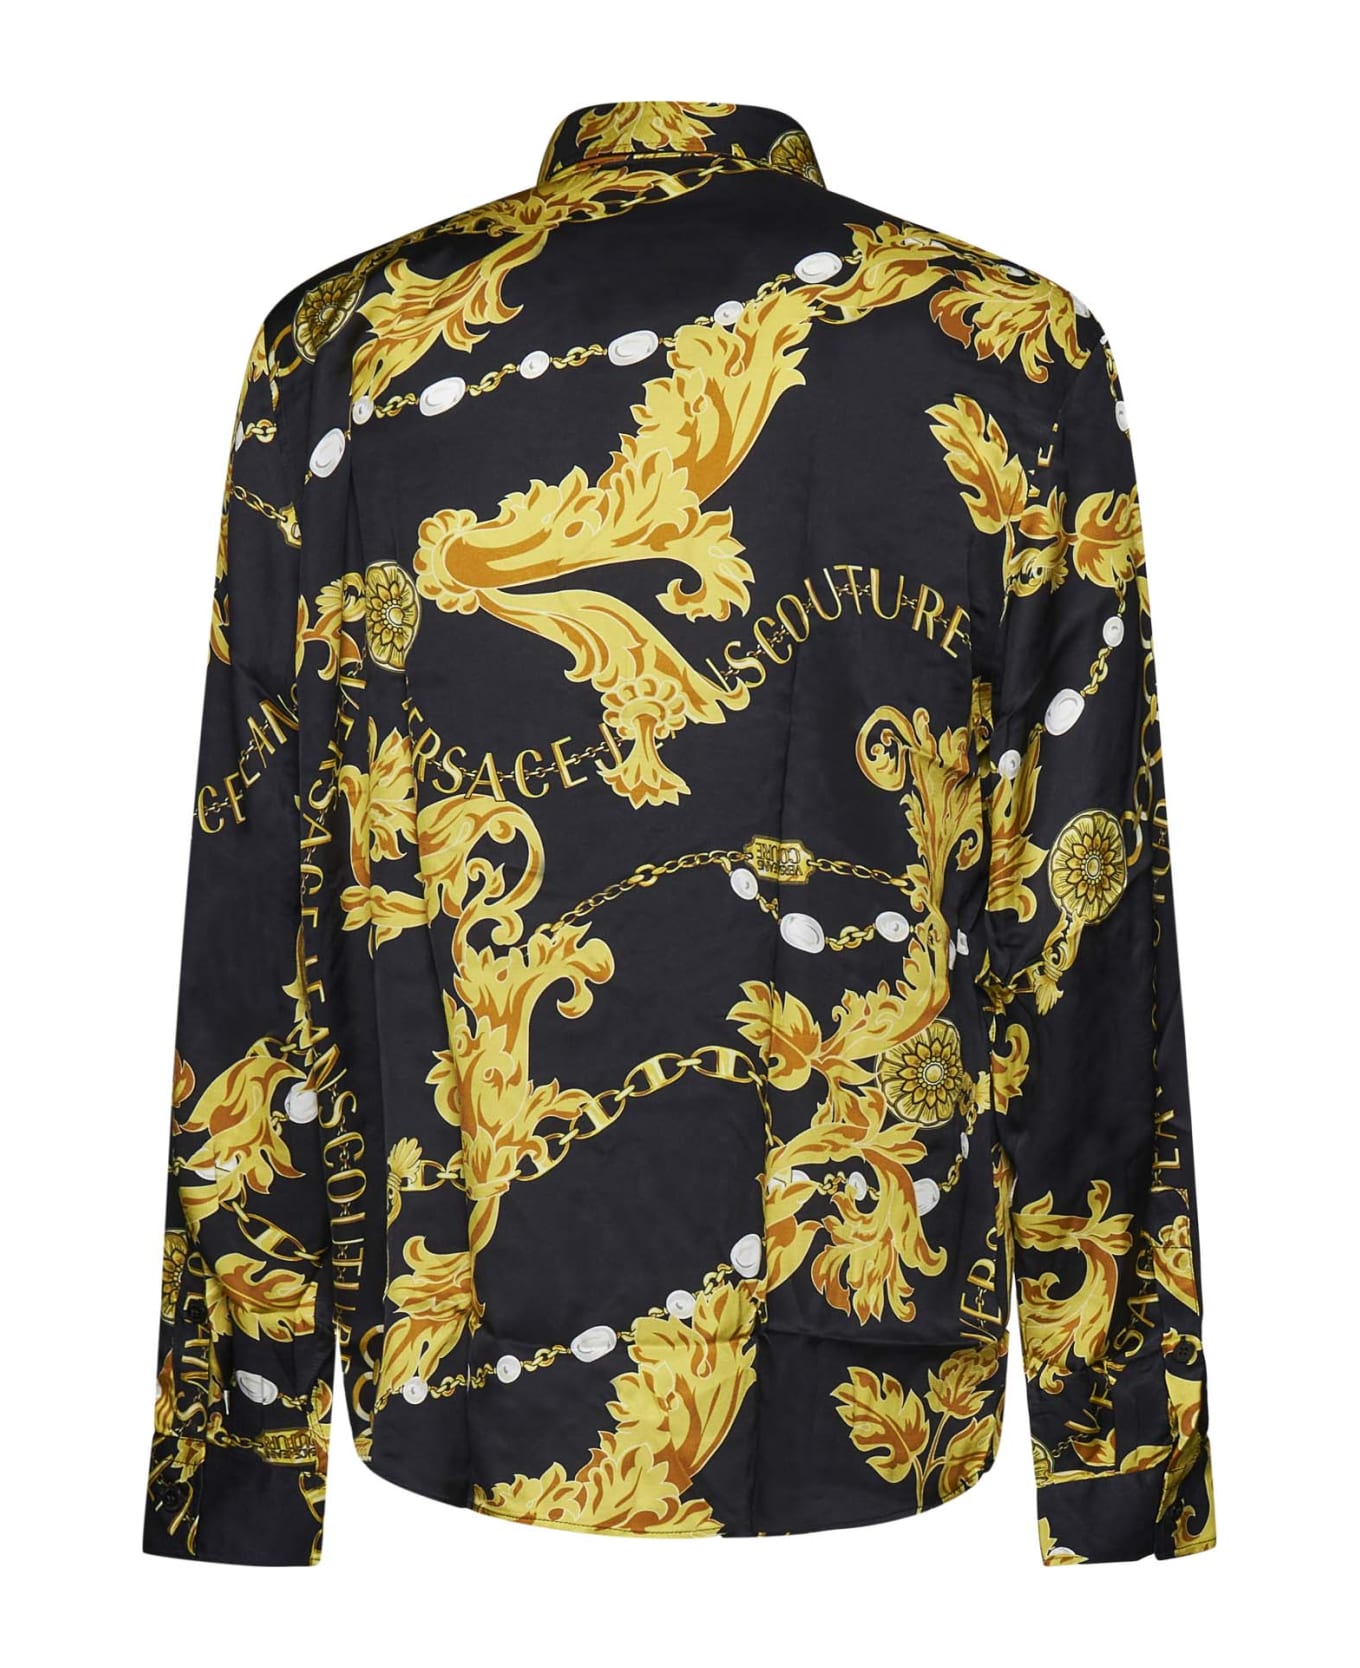 Versace Jeans Couture Shirt - Black Gold シャツ